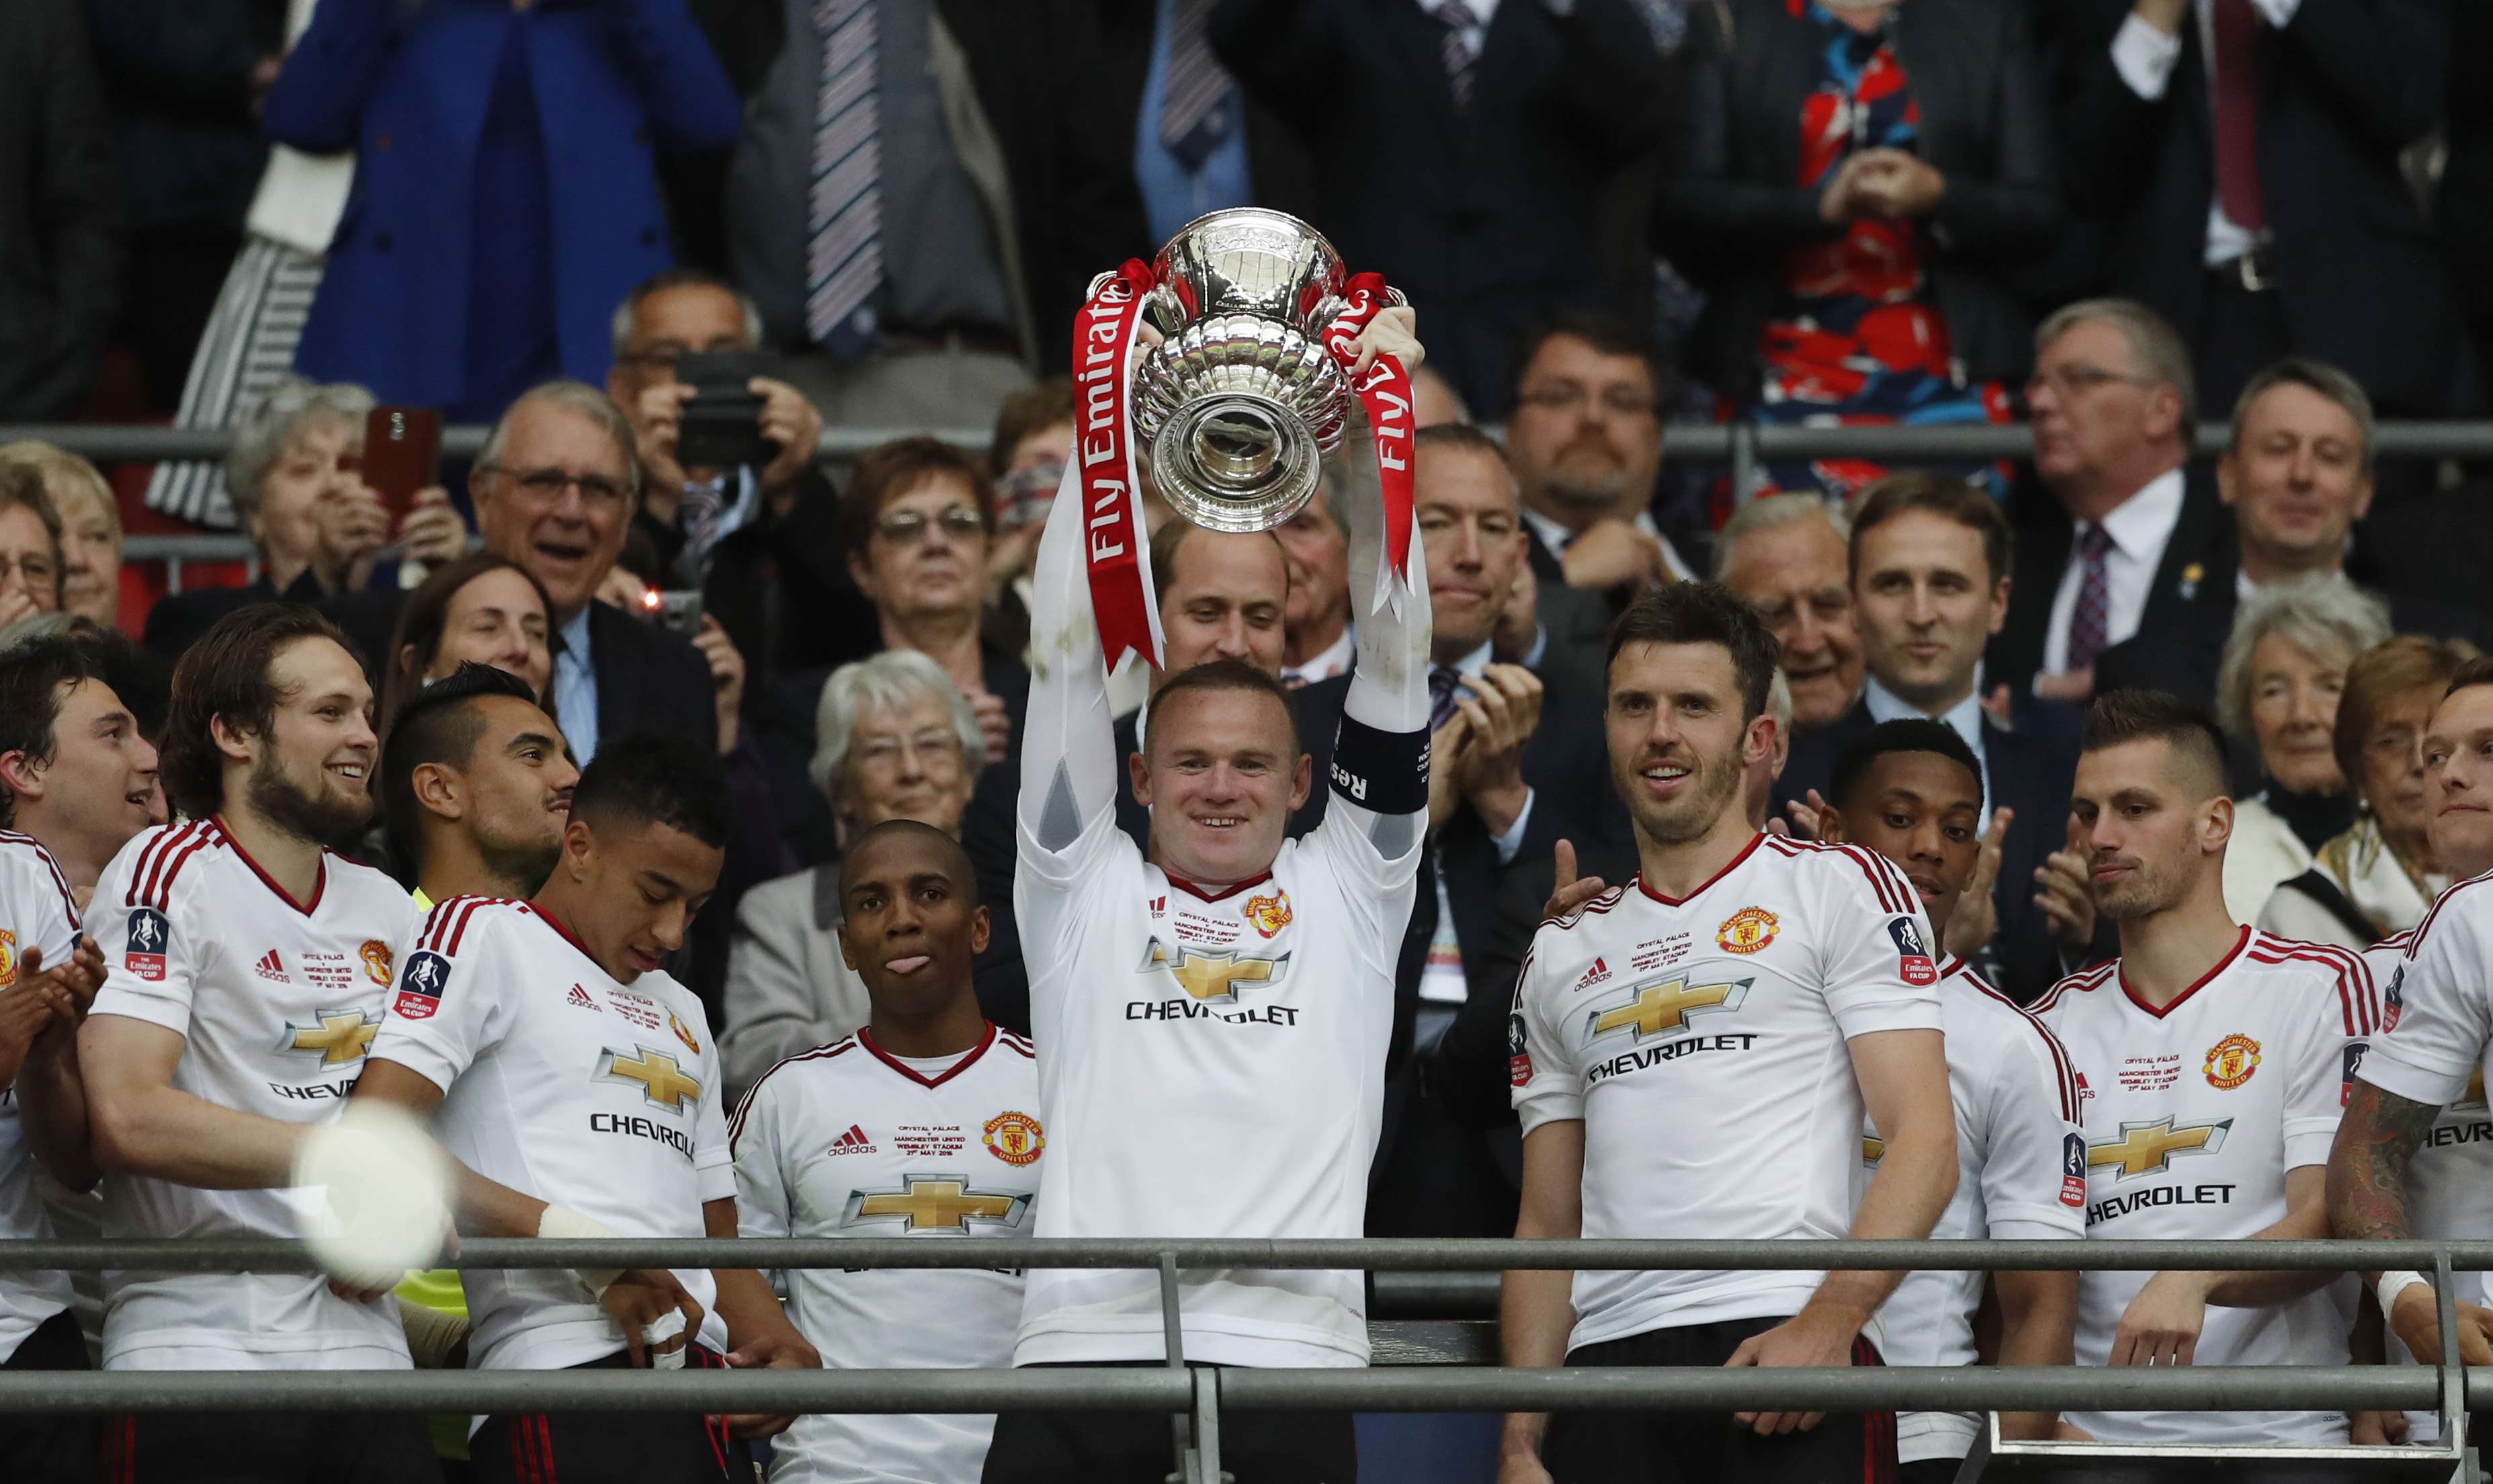 Manchester United's Wayne Rooney celebrates with the trophy after winning the FA Cup with teammates Photo: Reuters